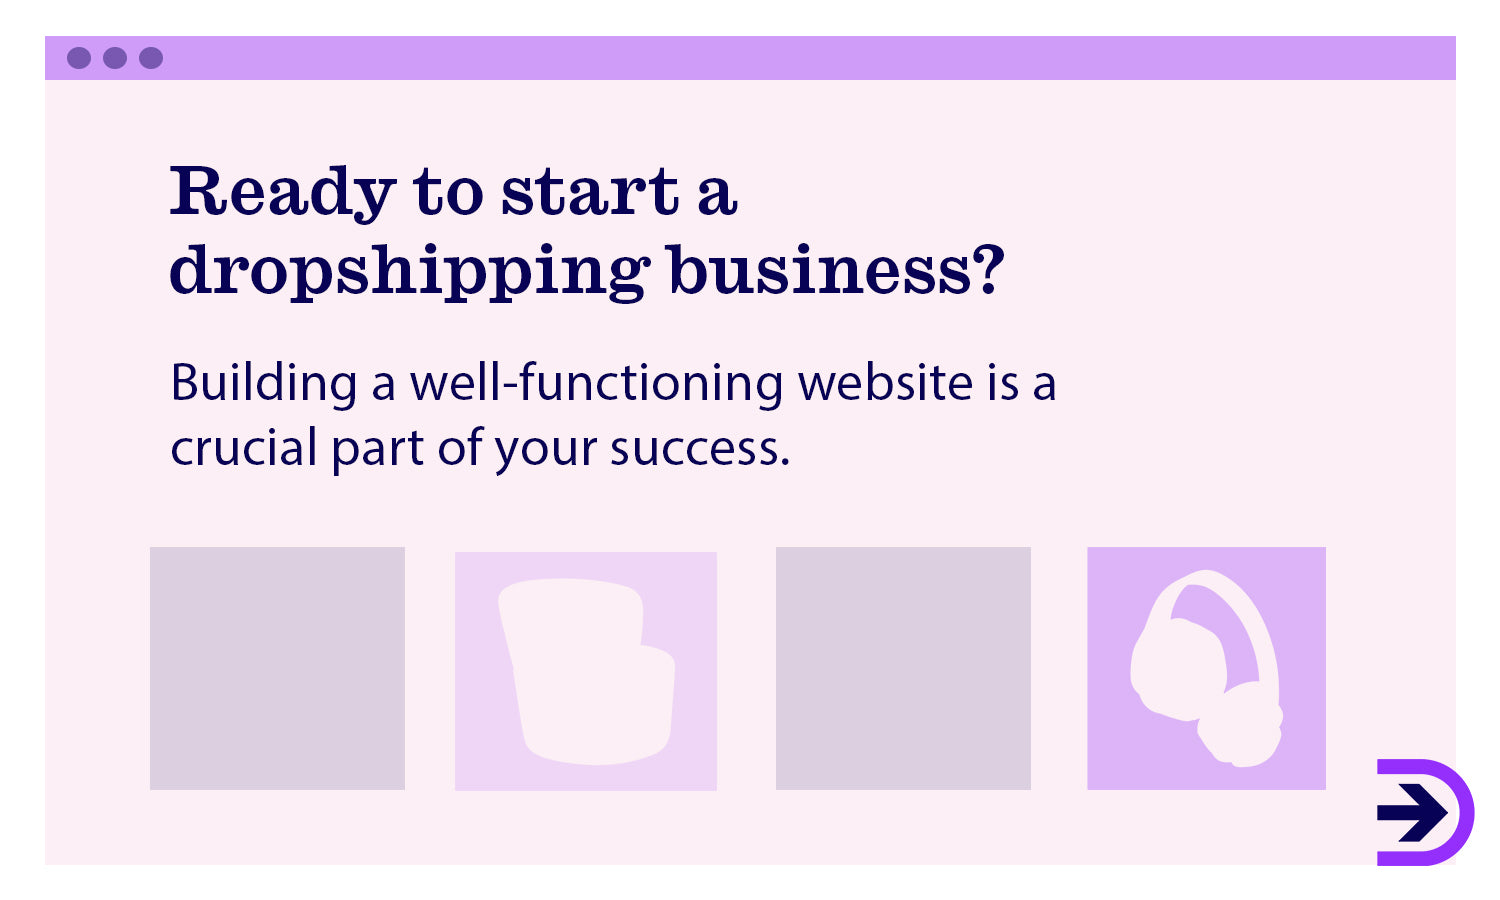 Create lasting customer relationships and increase the growth of your dropshipping business by building a well-functioning website.